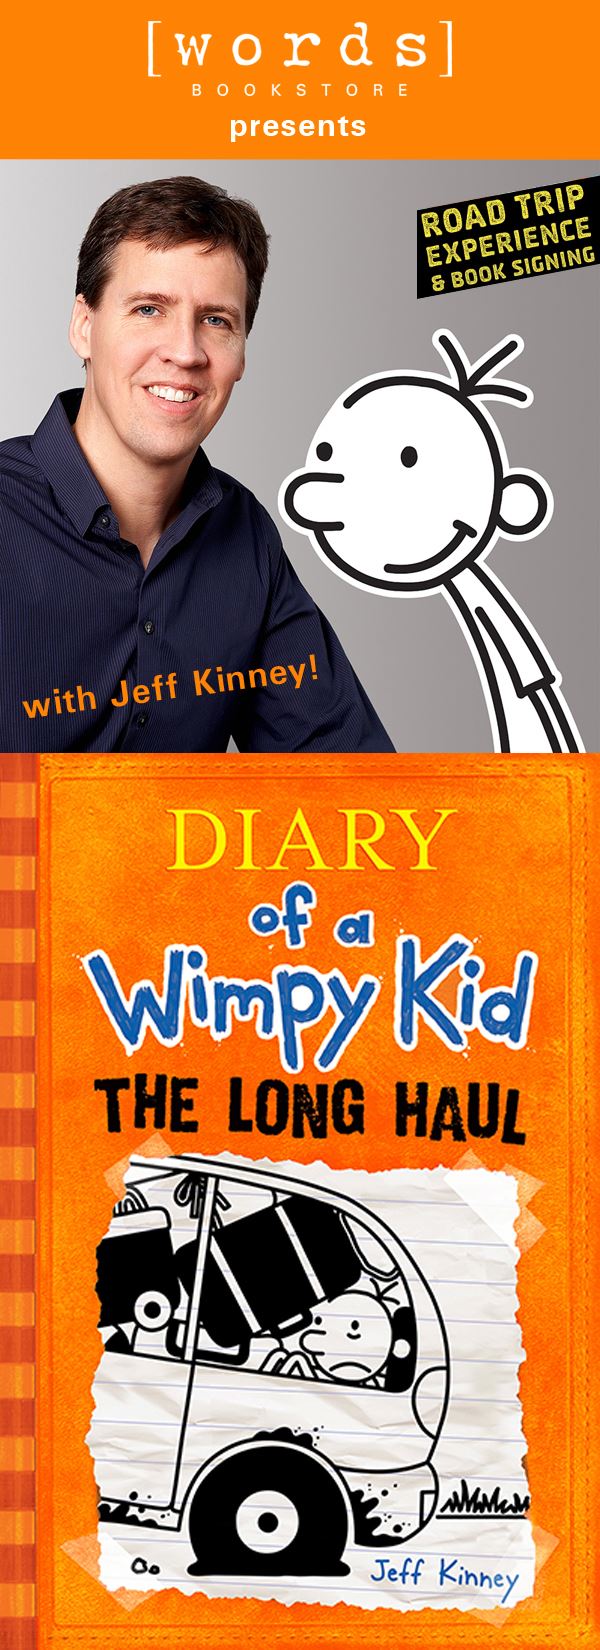 Diary of a Wimpy Kid Collection | The Poster Database 